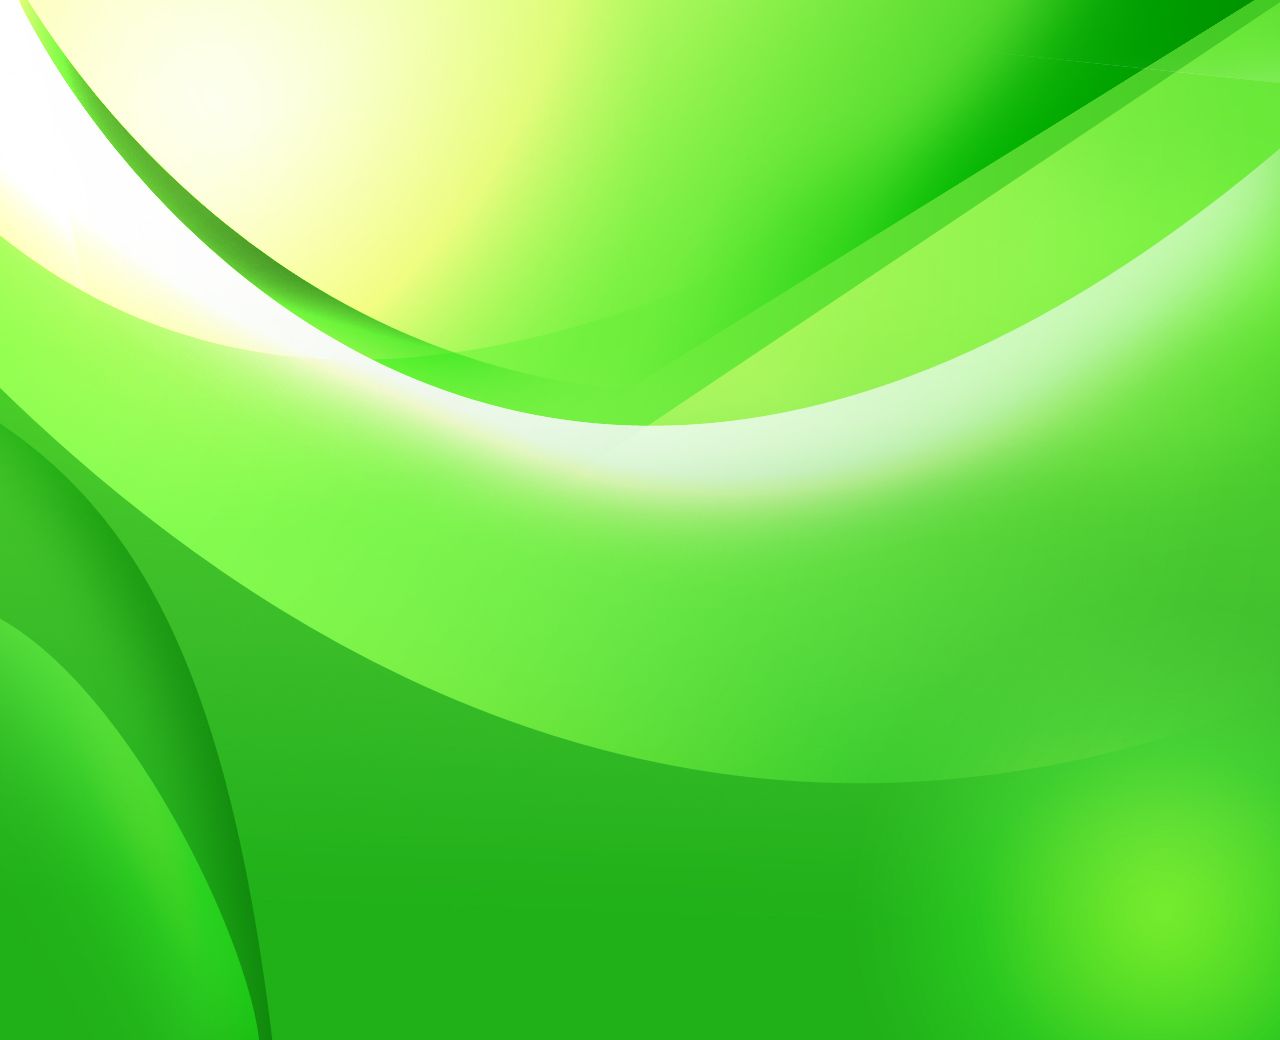 Green Wallpaper: HD, 4K, 5K for PC and Mobile. Download free